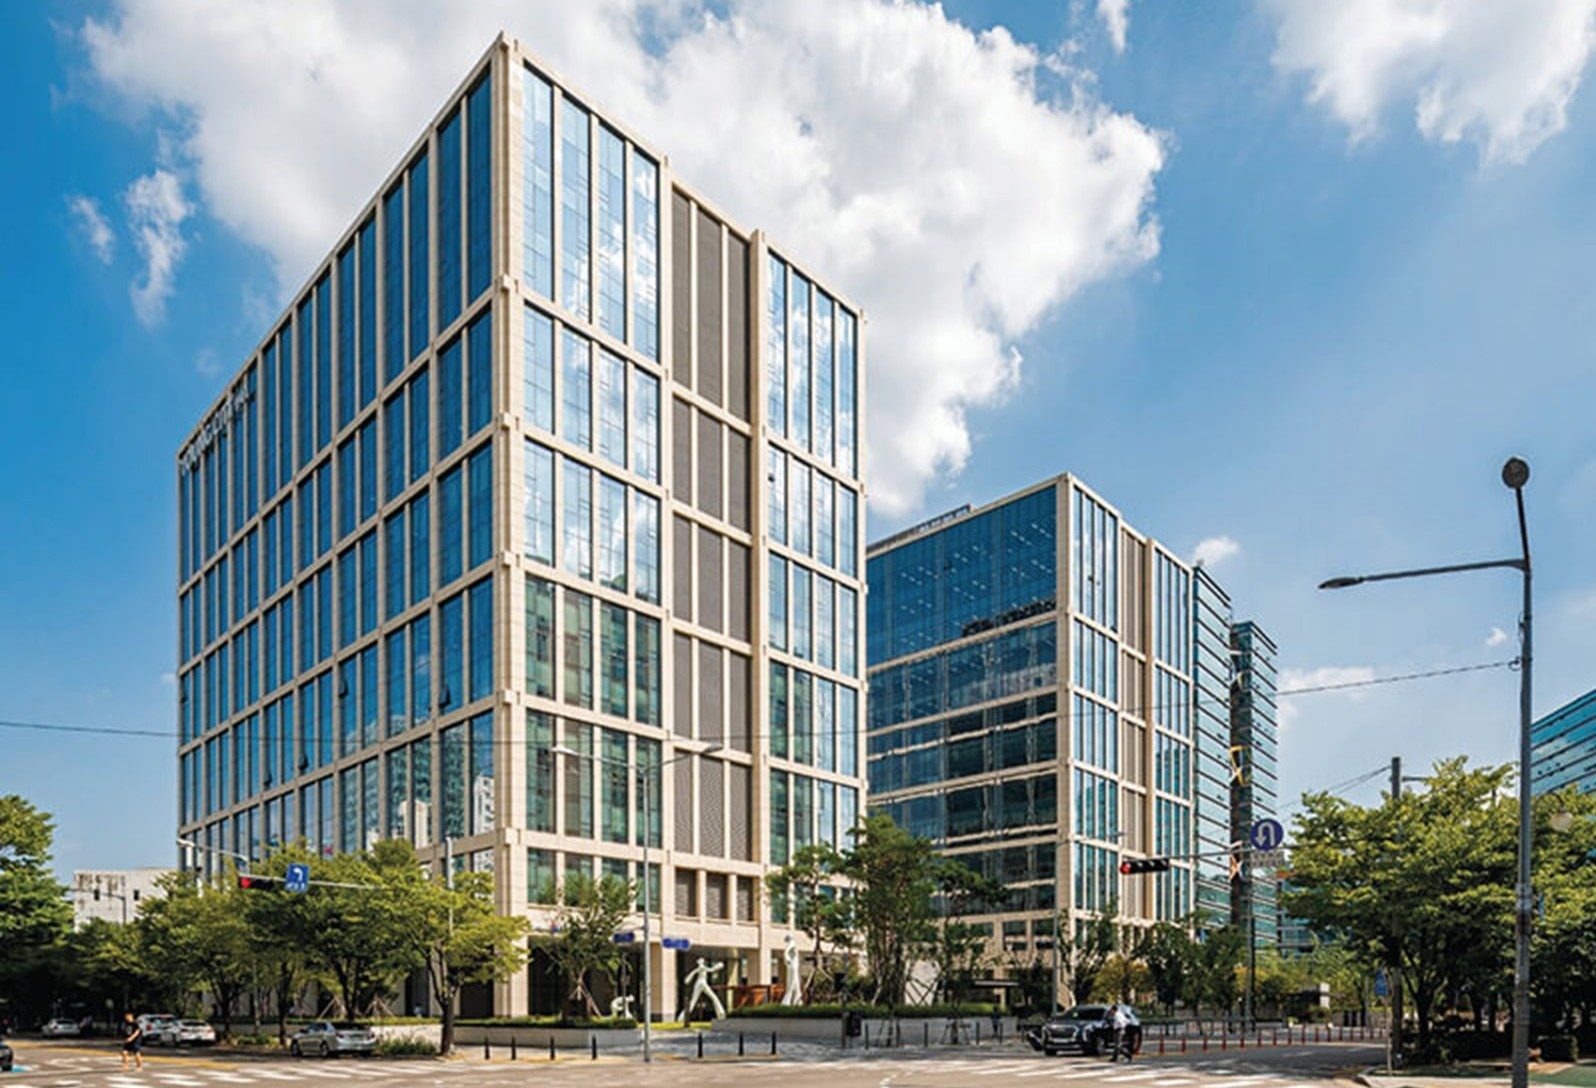 PE major Actis sells Seoul-based office building for $447m